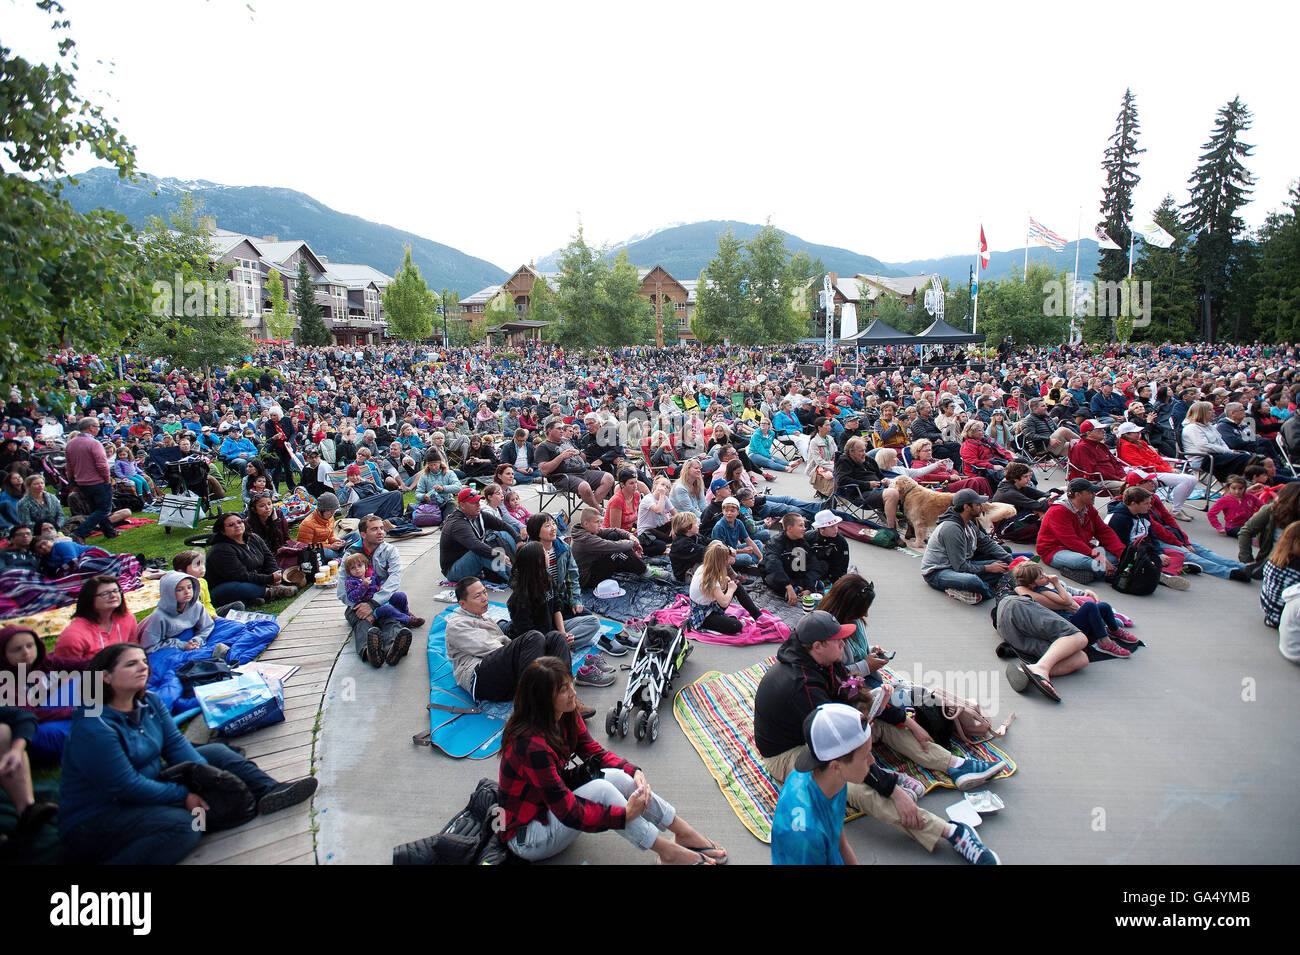 Huge crowds watch the Vancouver Symphony Orchestra during a Canada Day concert at the Whistler Olympic Plaza.  Friday, July 1, 2 Stock Photo